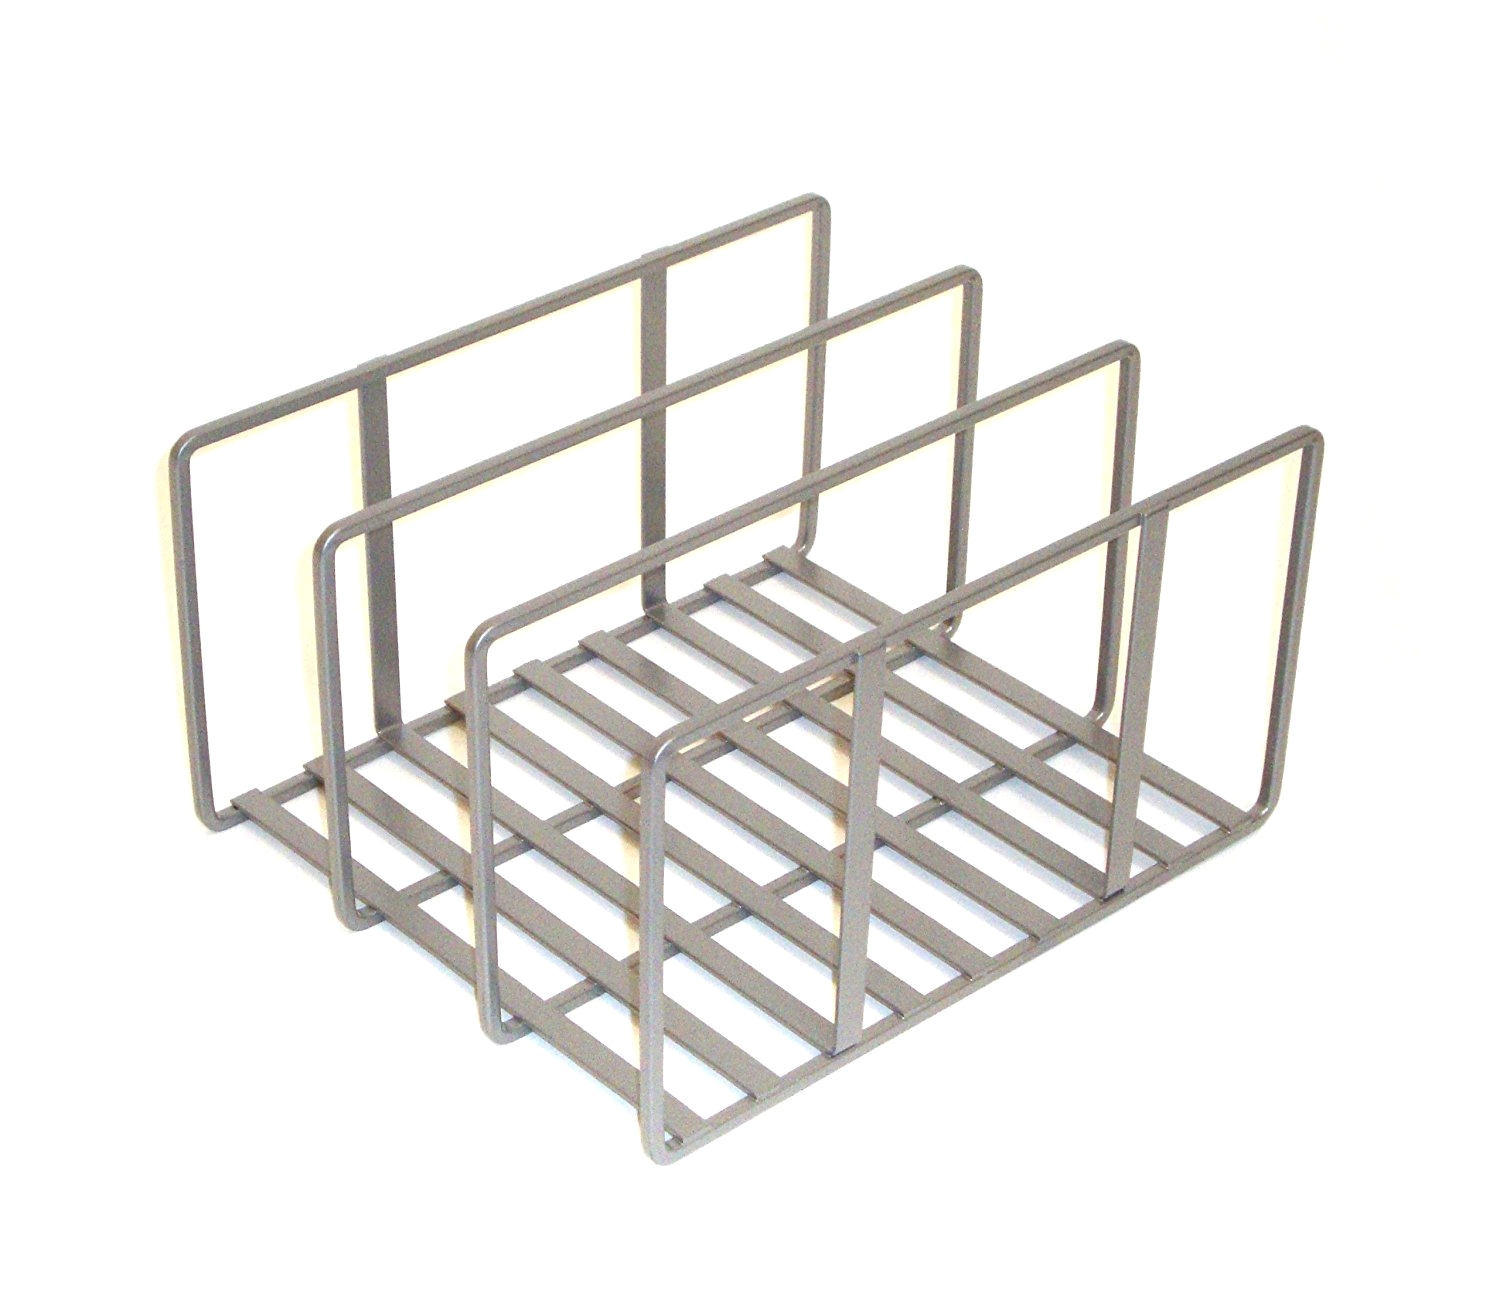 Baking Sheet with Wire Rack Insert Amazon Com Seville Classics Kitchen Pantry and Cabinet organizer